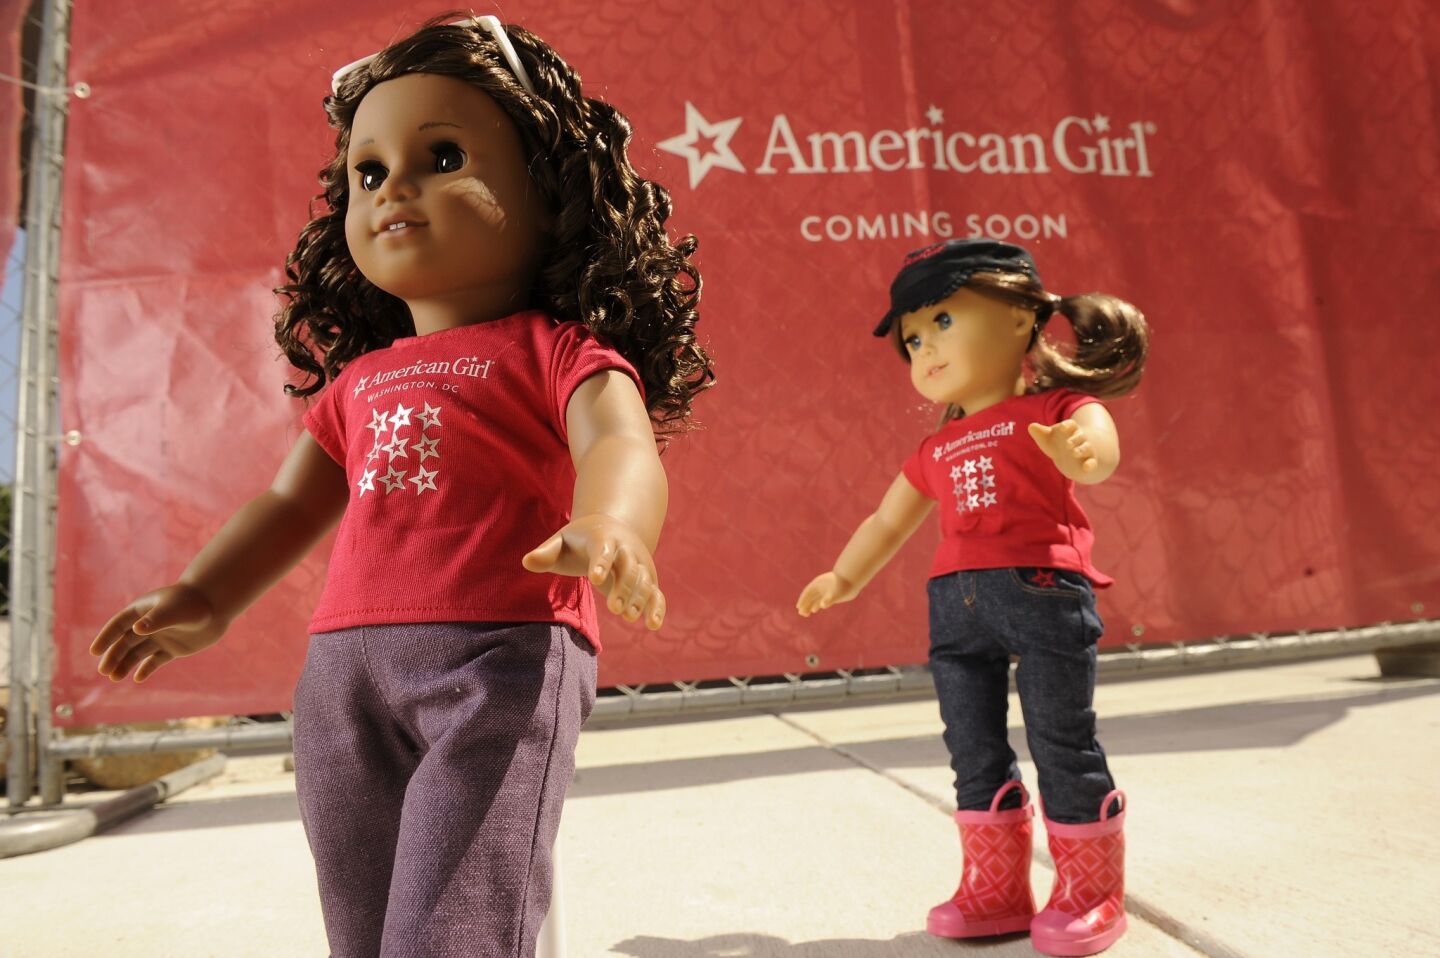 5. American Girl (tied). Mattel said worldwide gross sales for the brand were up 20% in the third quarter.